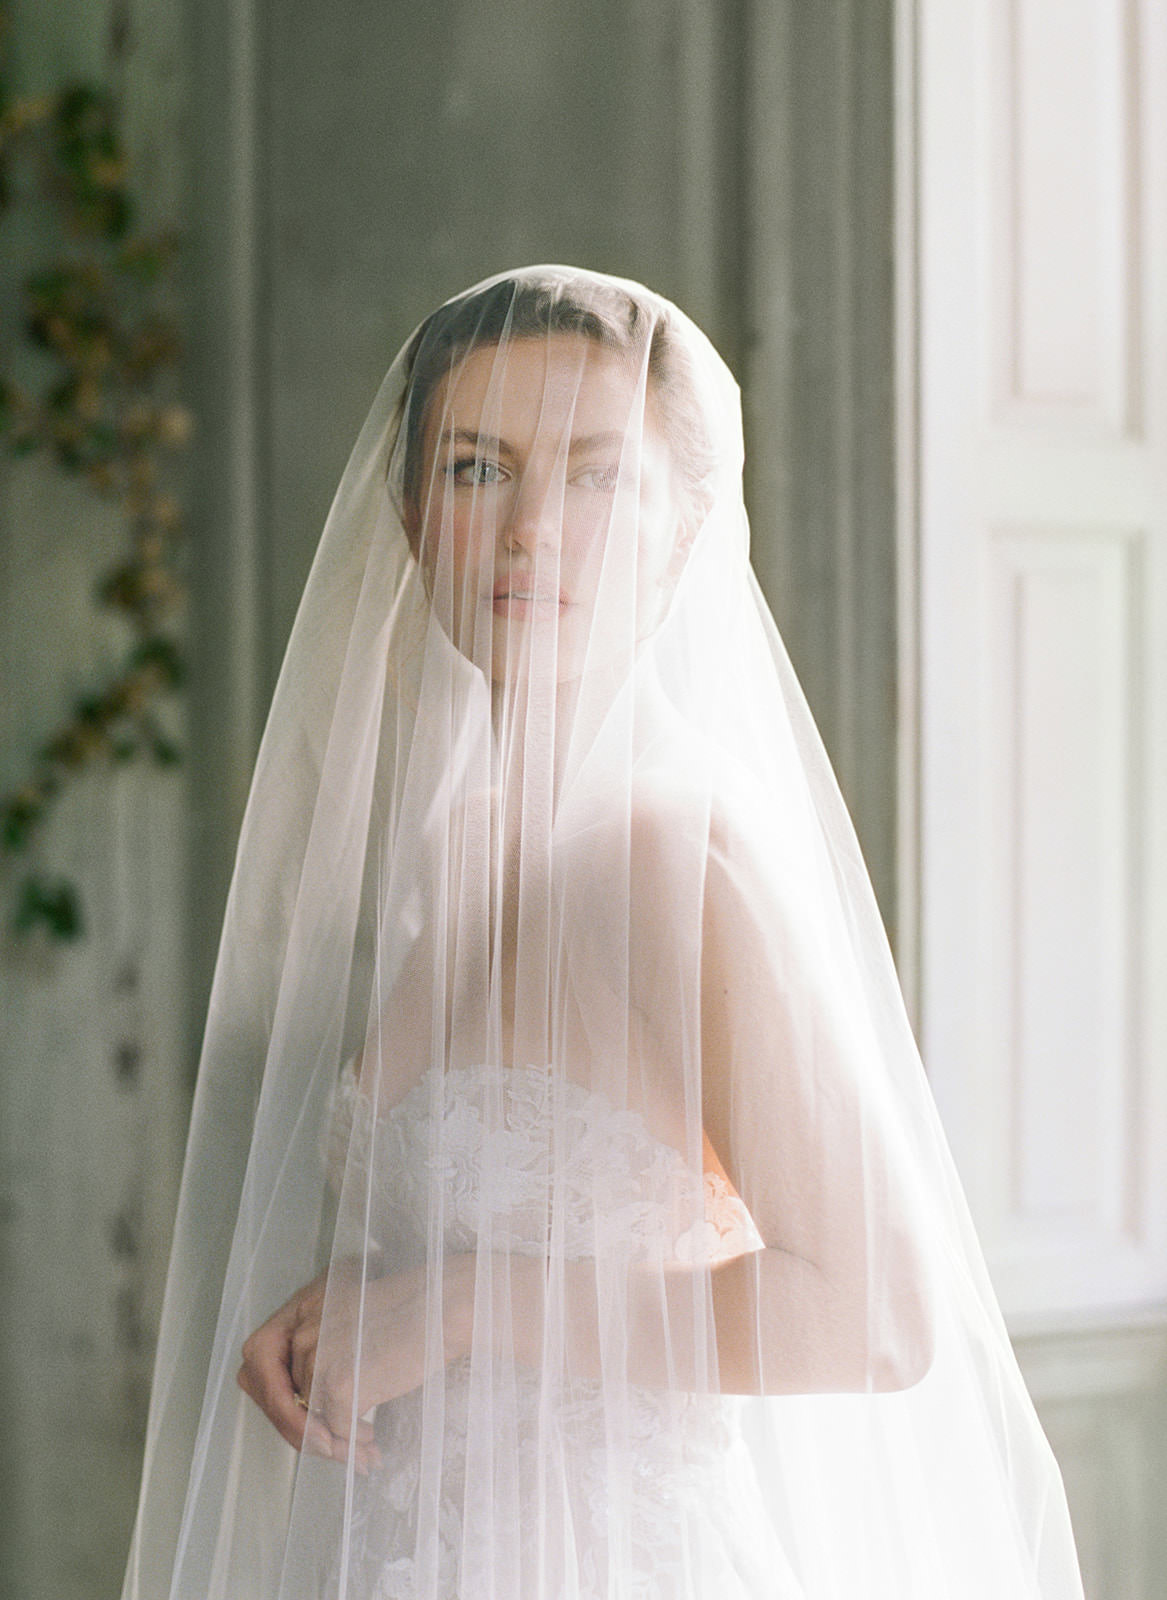 Bride with Viel over her face in portrait